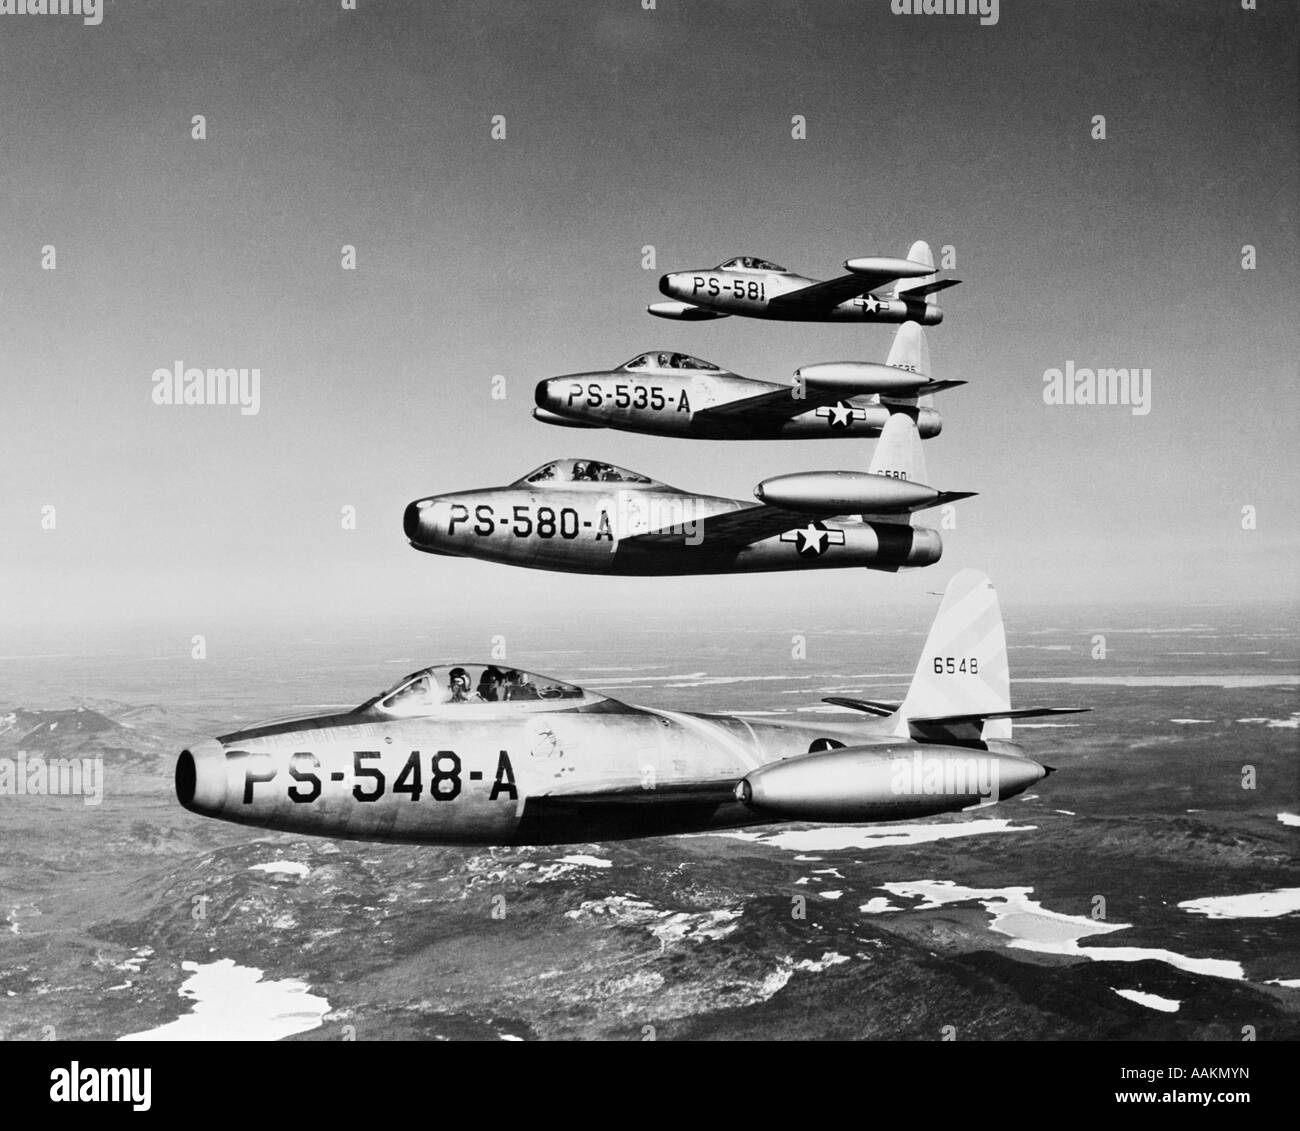 1950s FOUR US AIR FORCE THUNDER JETS IN FLIGHT FORMATION Stock Photo